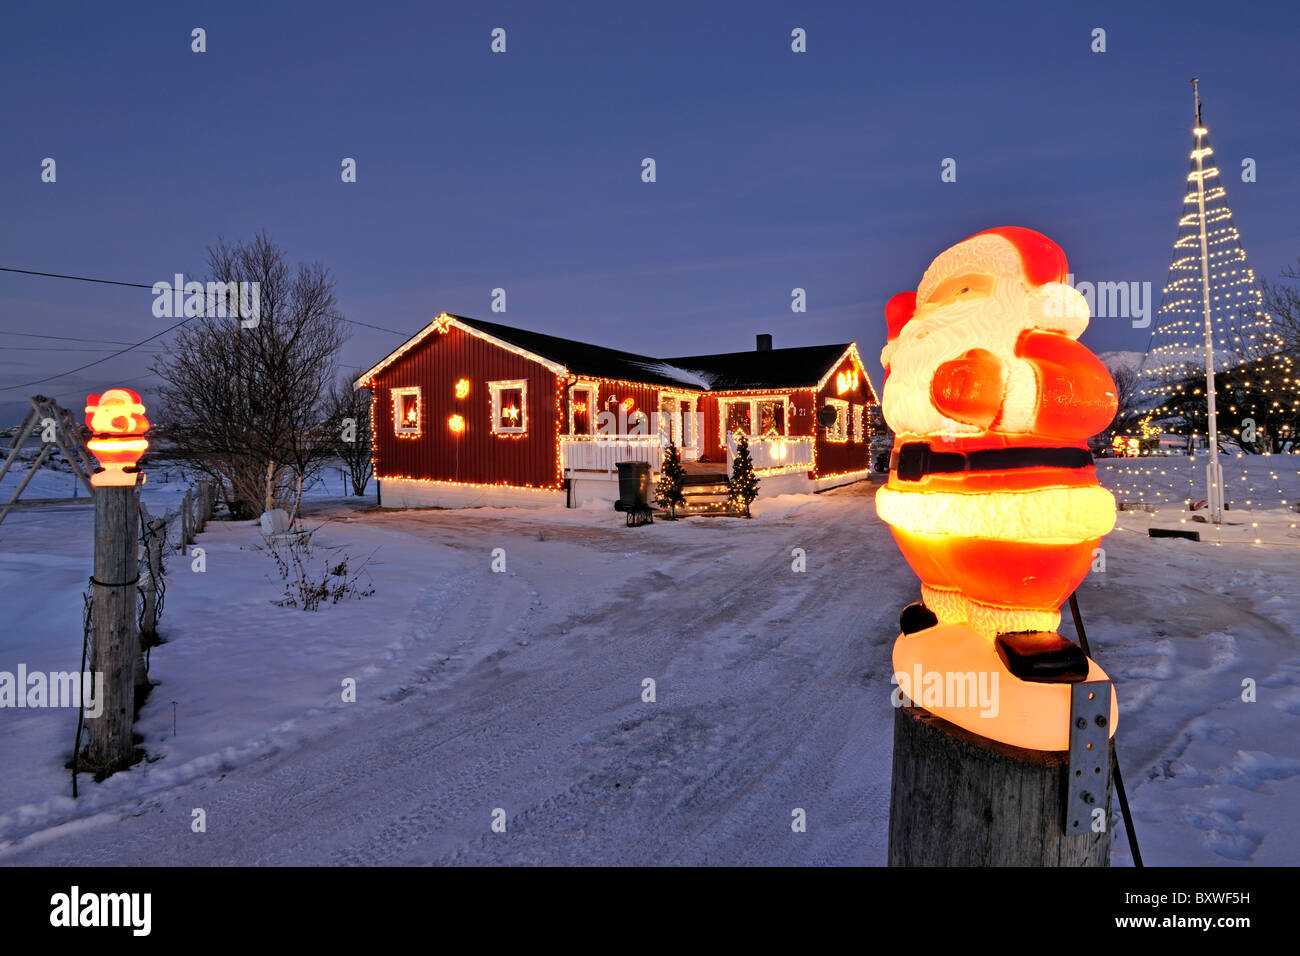 Saturate Dare marriage House with Christmas decoration, North Norway Stock Photo - Alamy